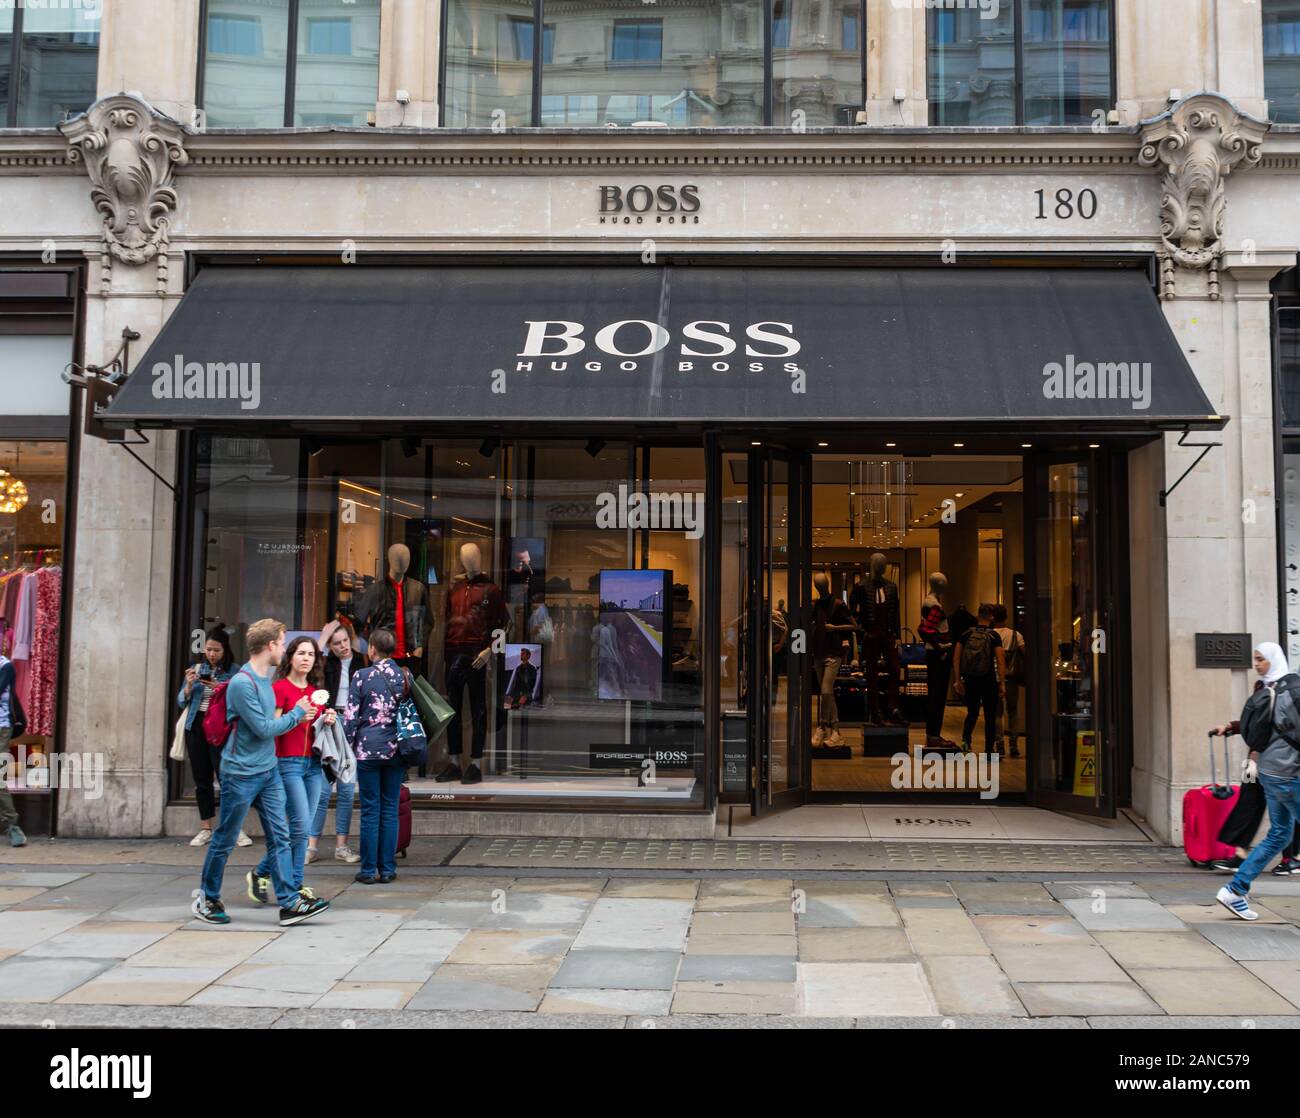 London, United Kingdom - August 18 2019: The frontage of the Hugo store on regent Street Photo - Alamy